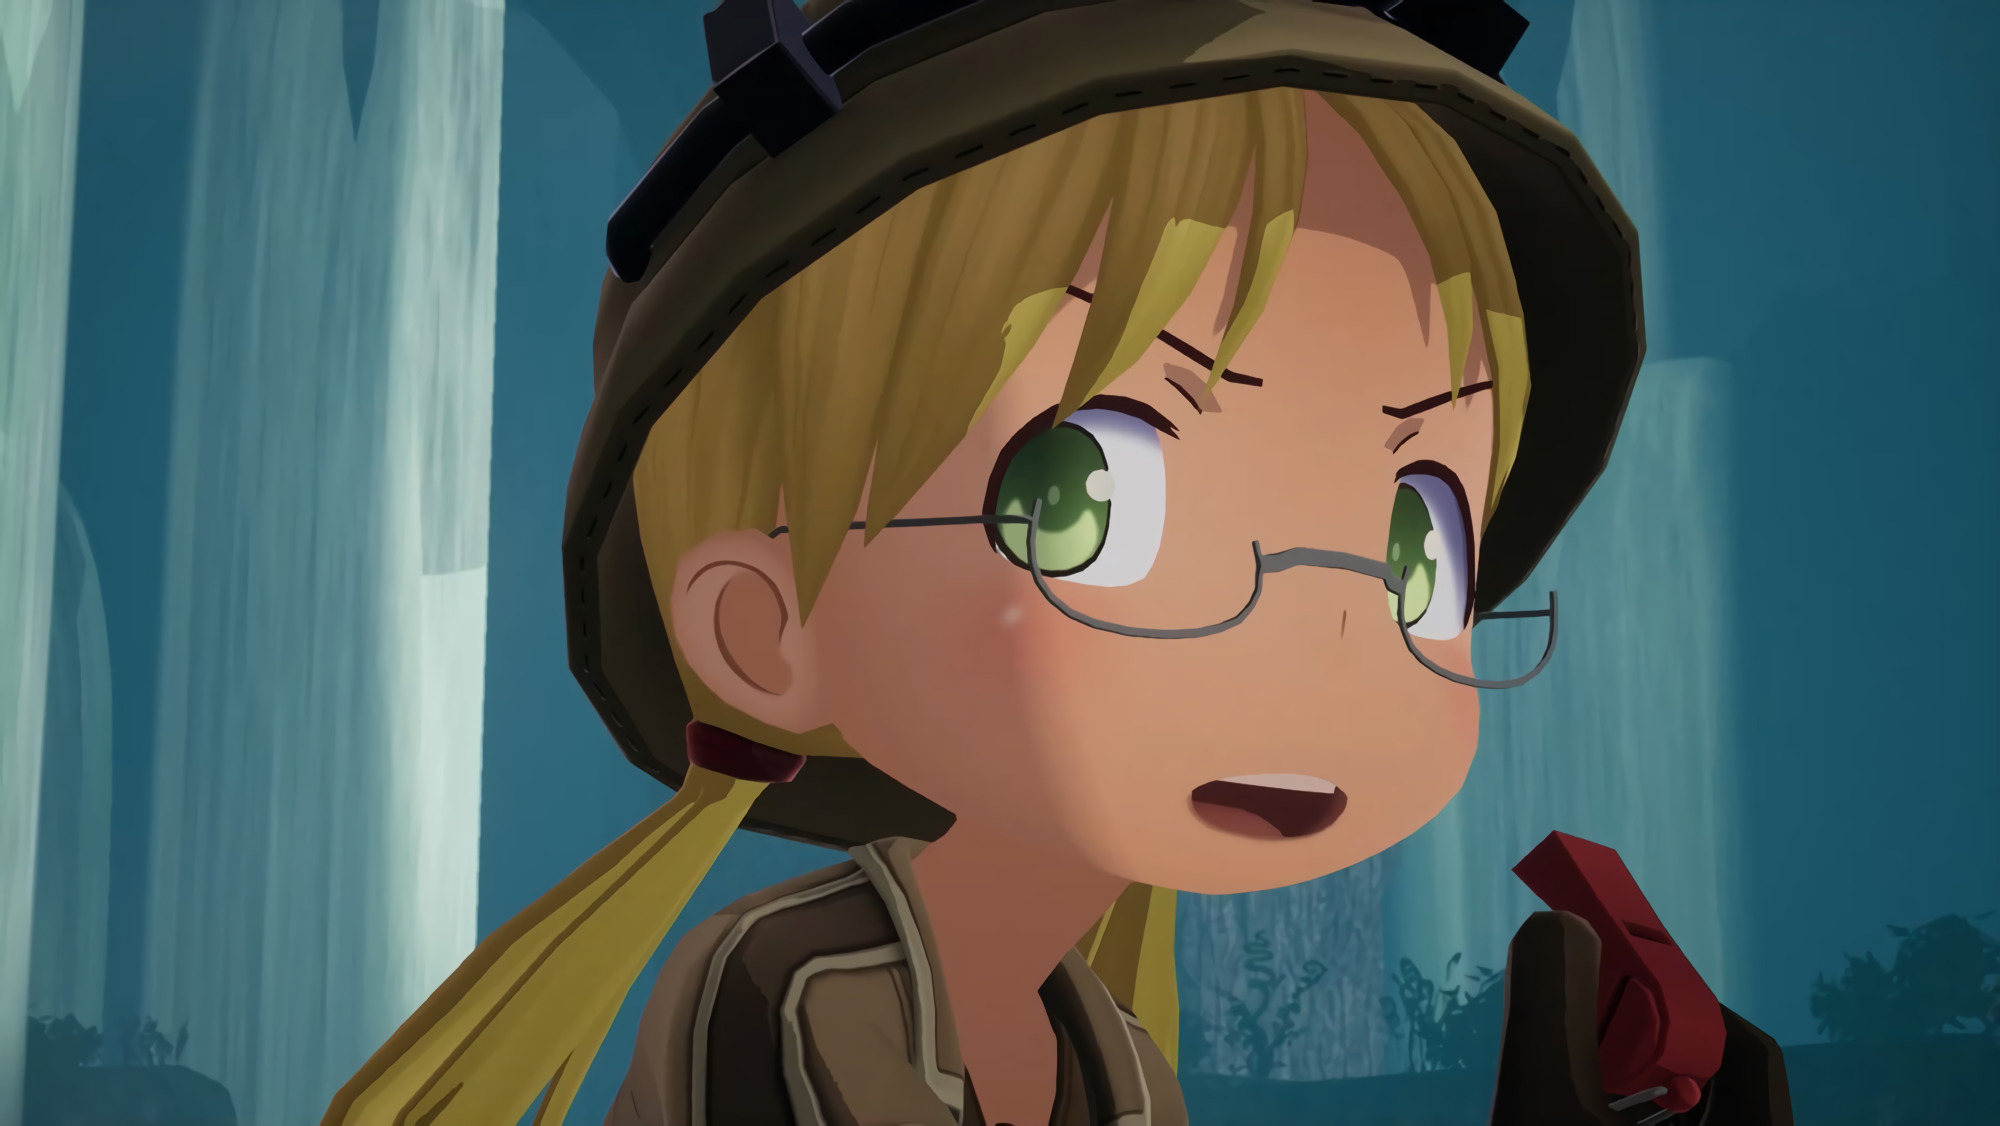 Made in Abyss: Binary Star Falling into Darkness coming this fall